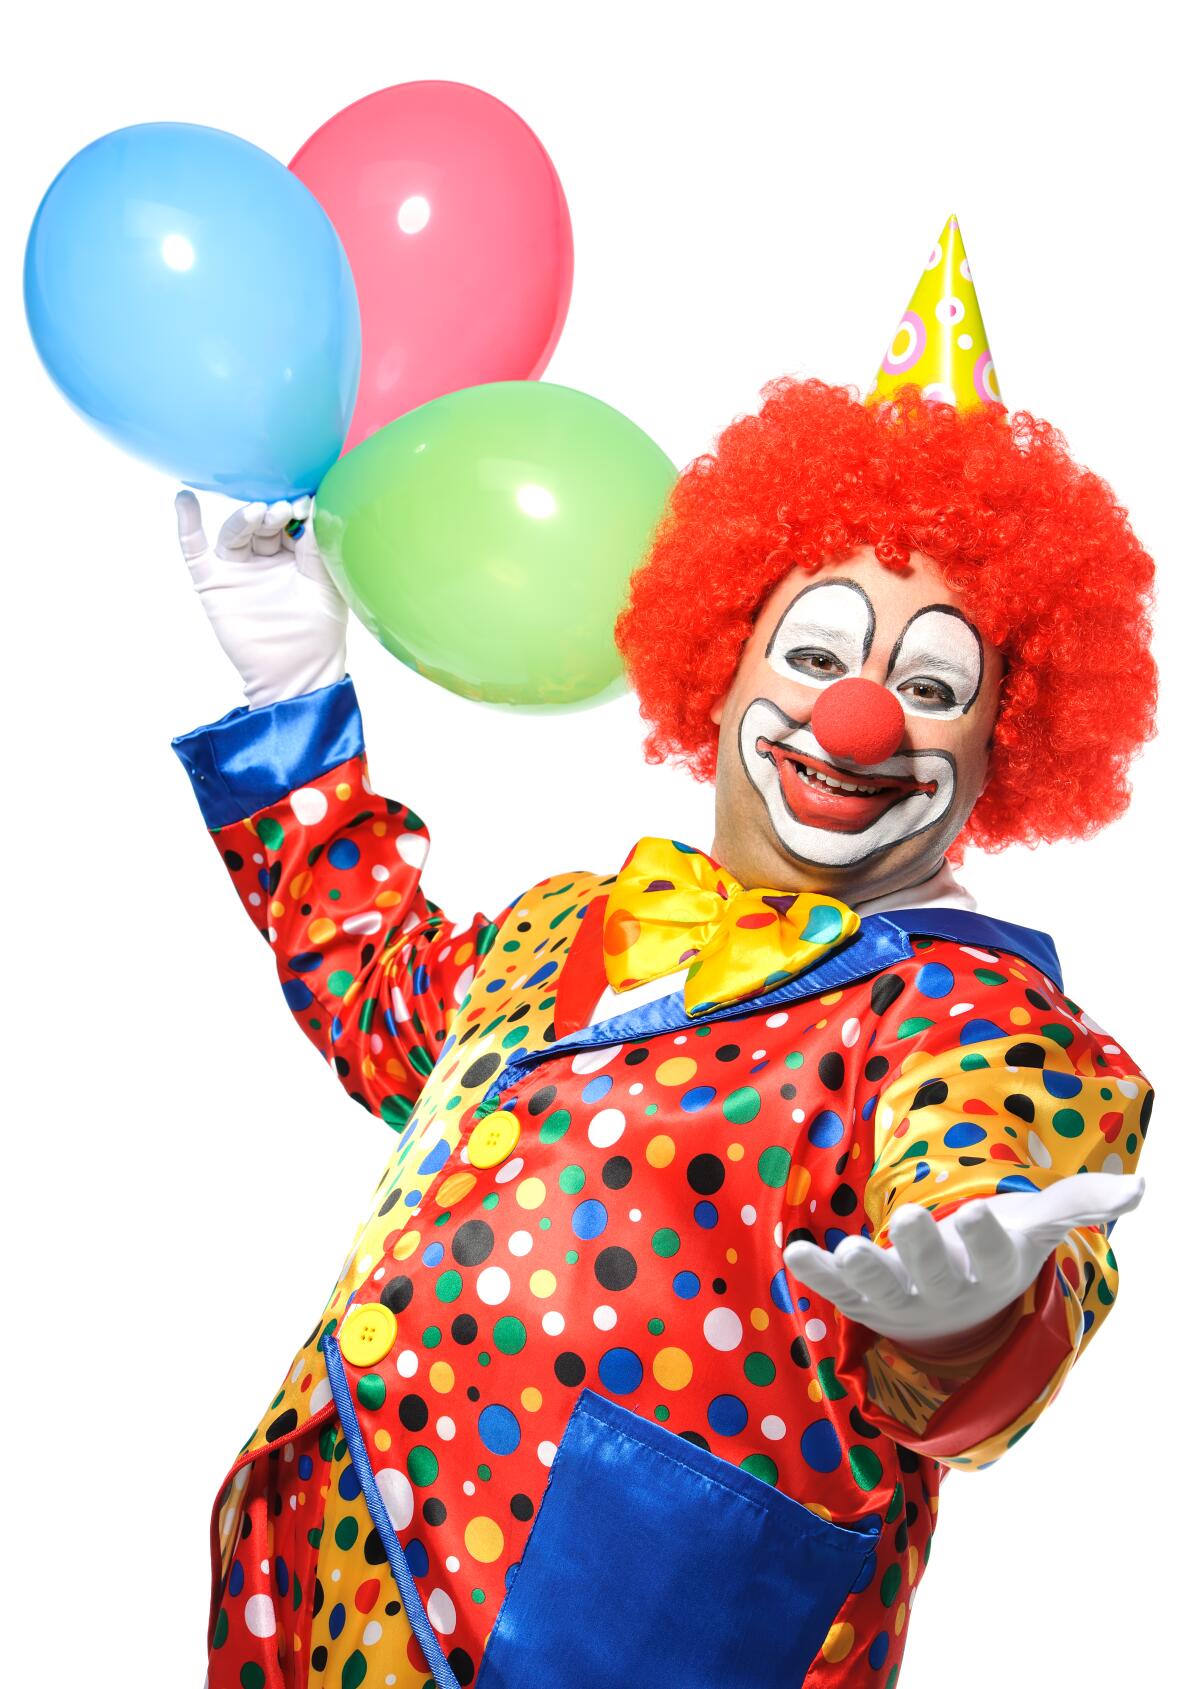 Portrait of a smiling clown with balloons isolated on white